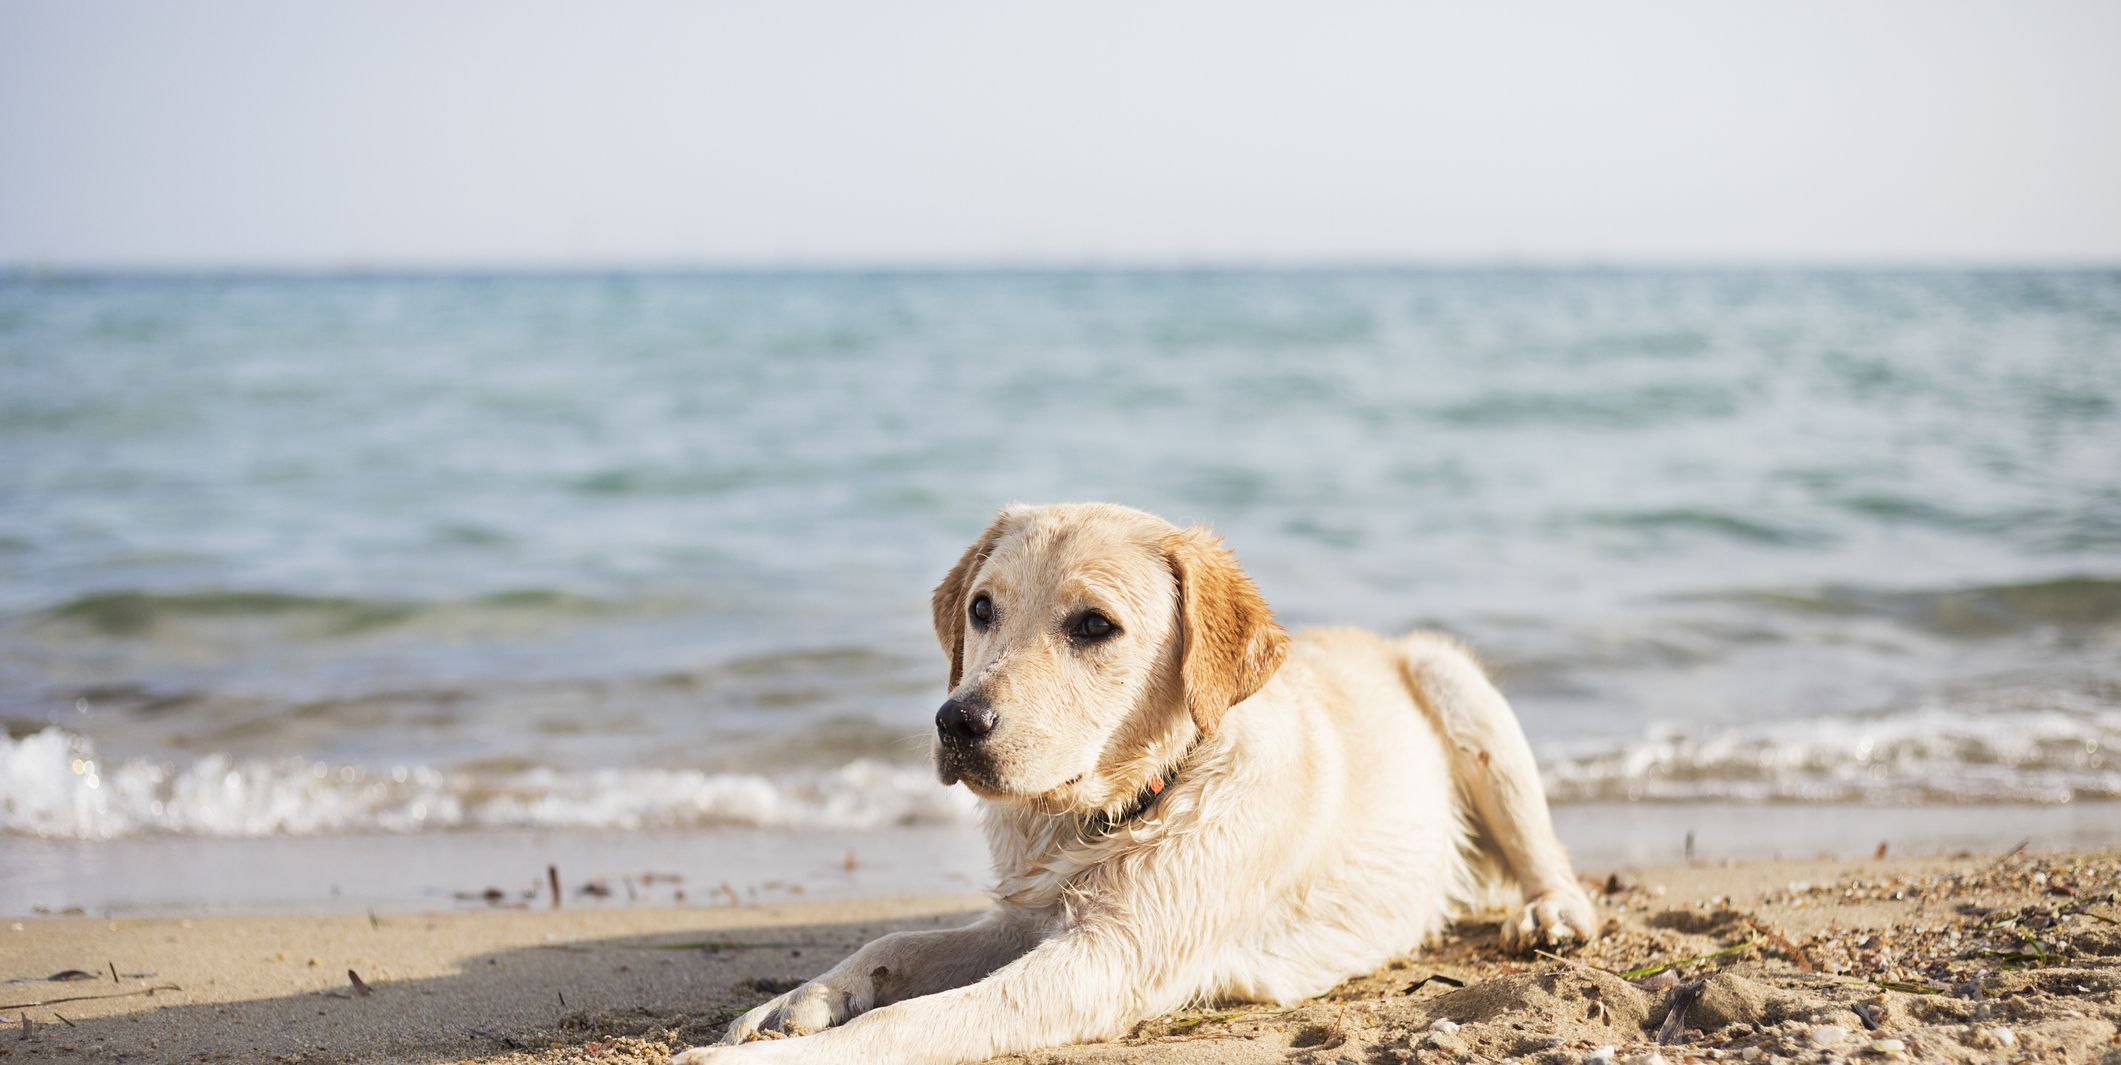 are beaches safe for dogs